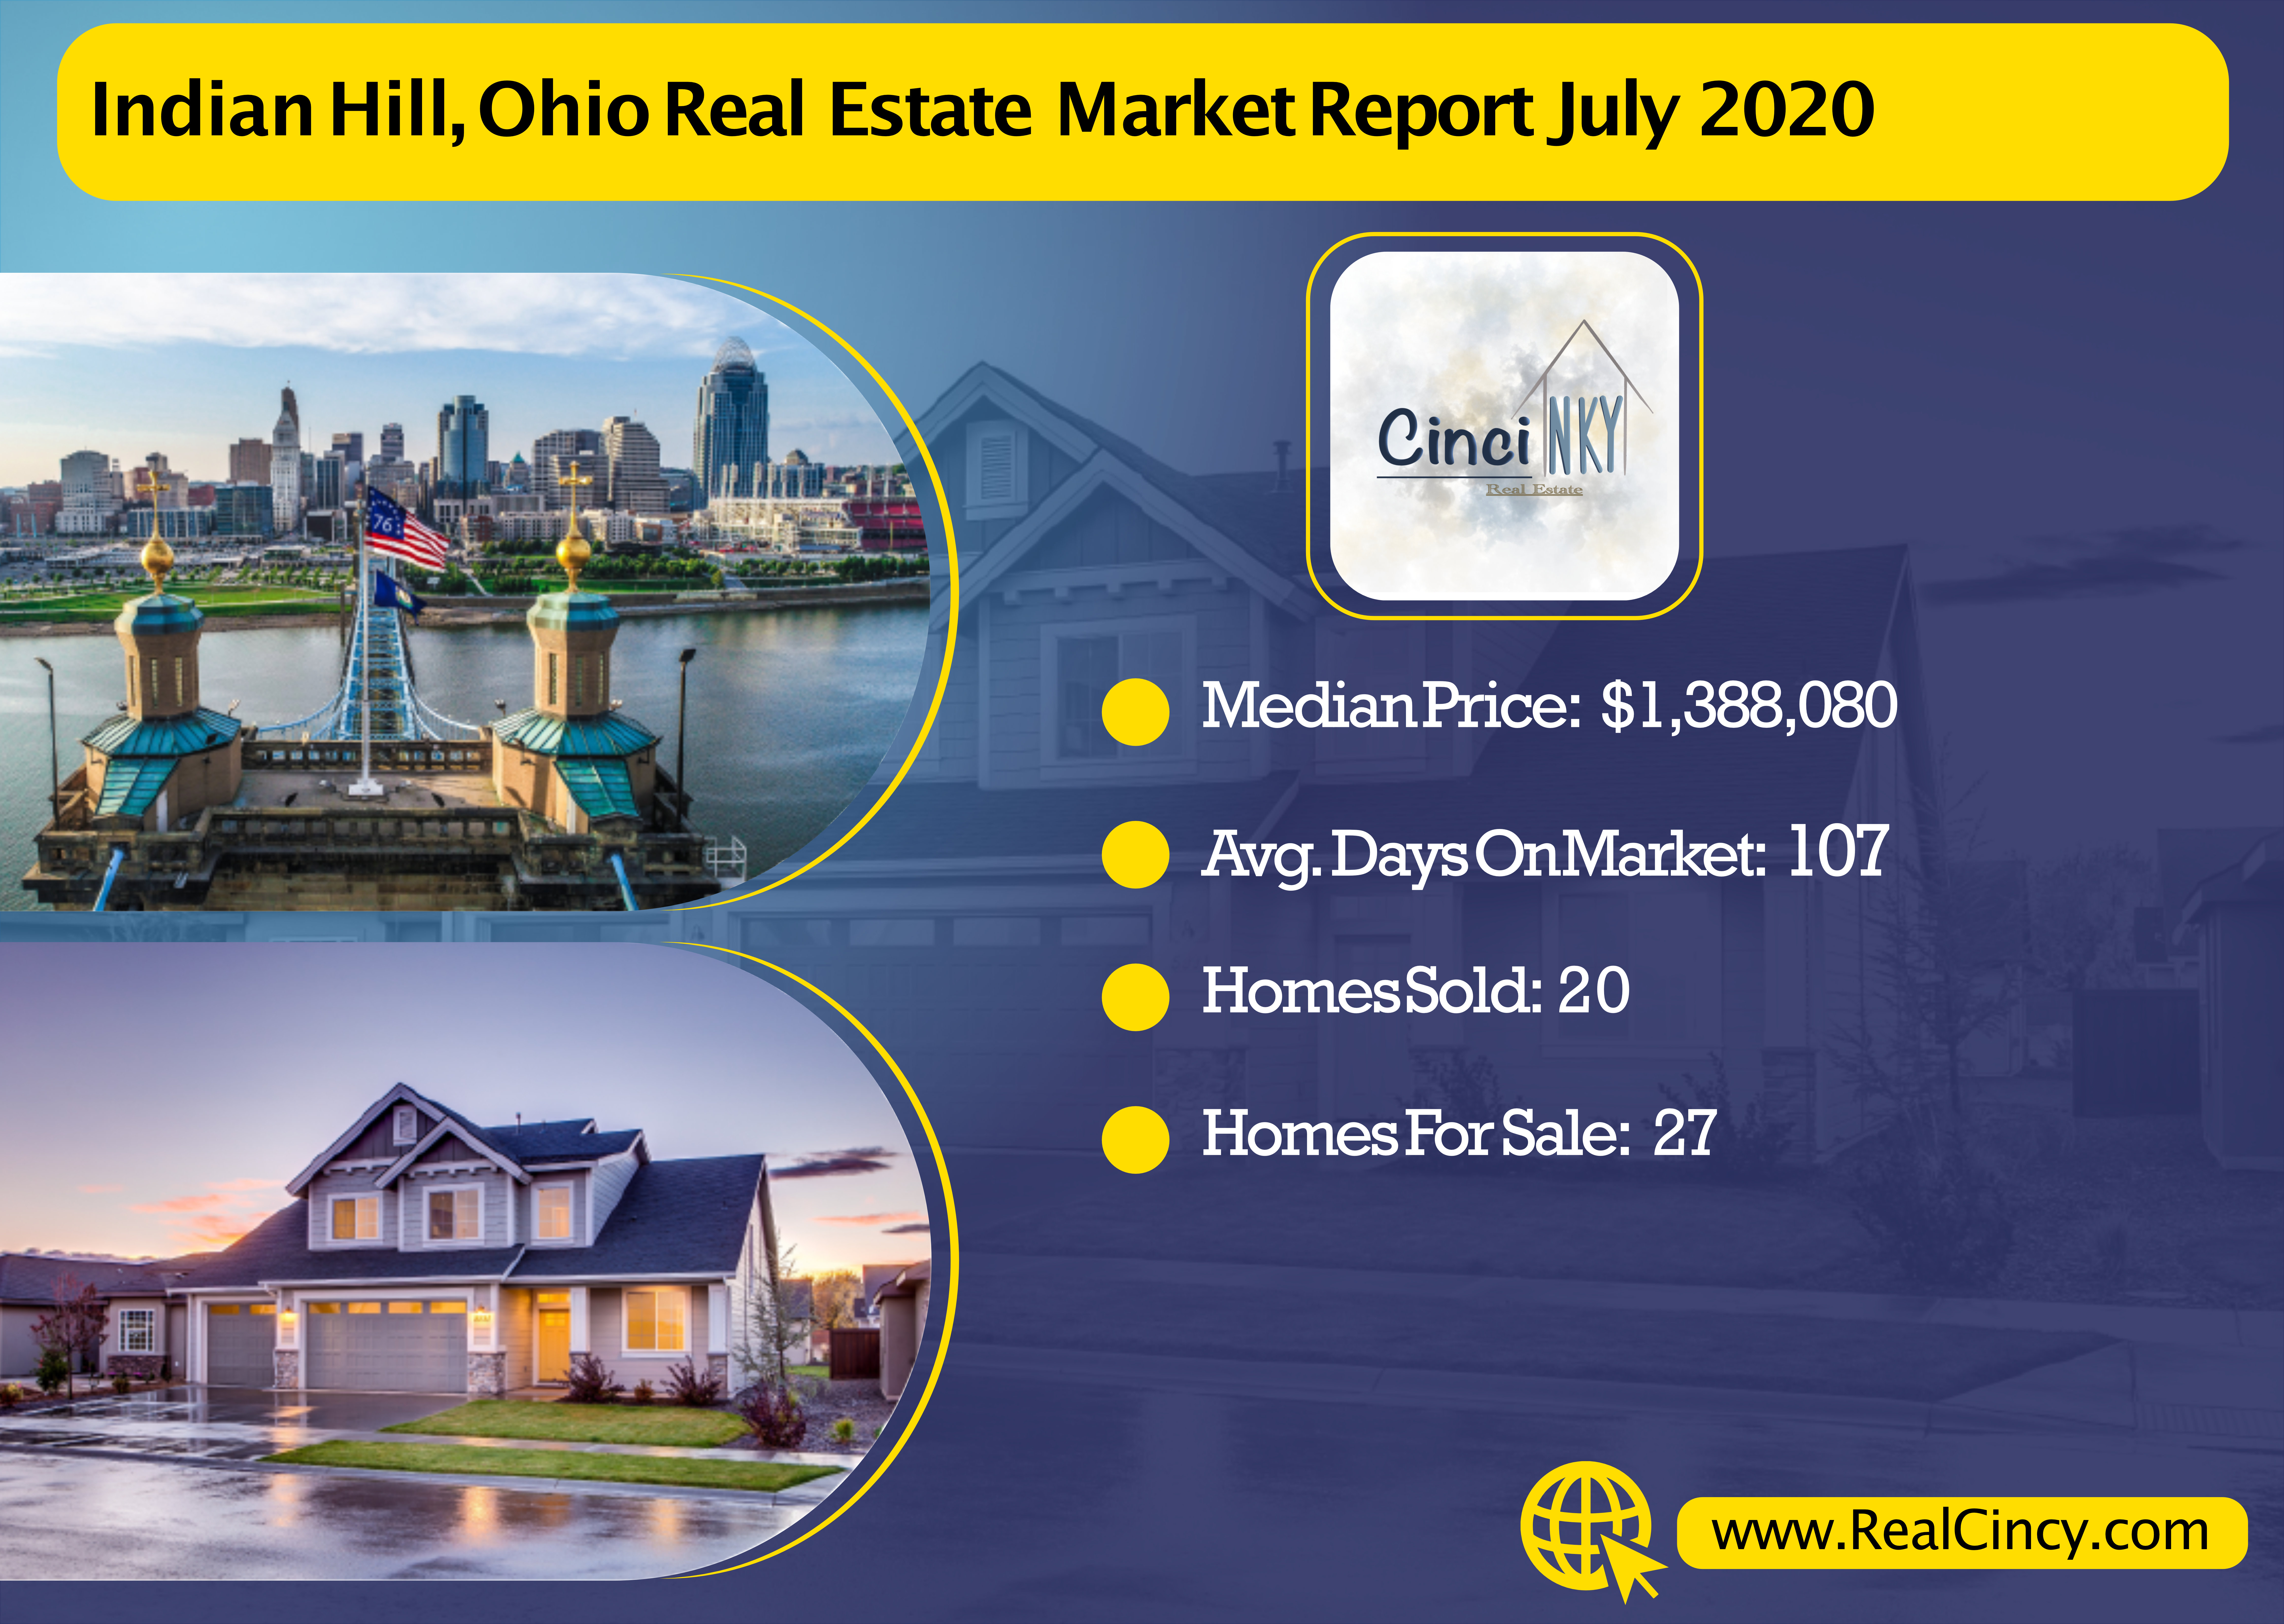 Indian Hill, Ohio July 2020 Real Estate Market Report